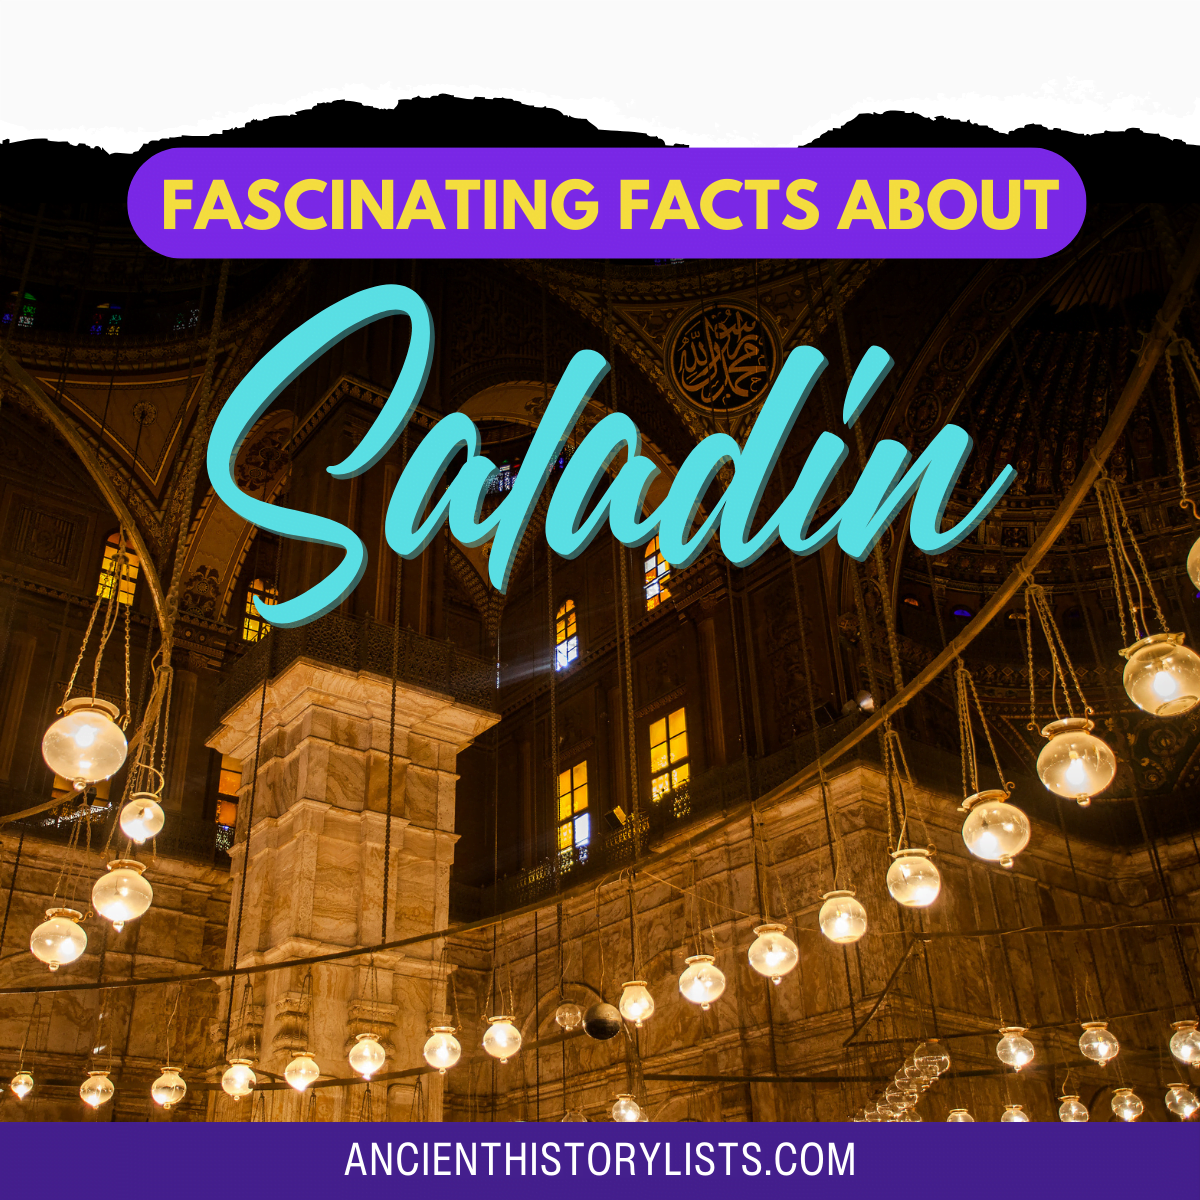 Fascinating Facts about Saladin